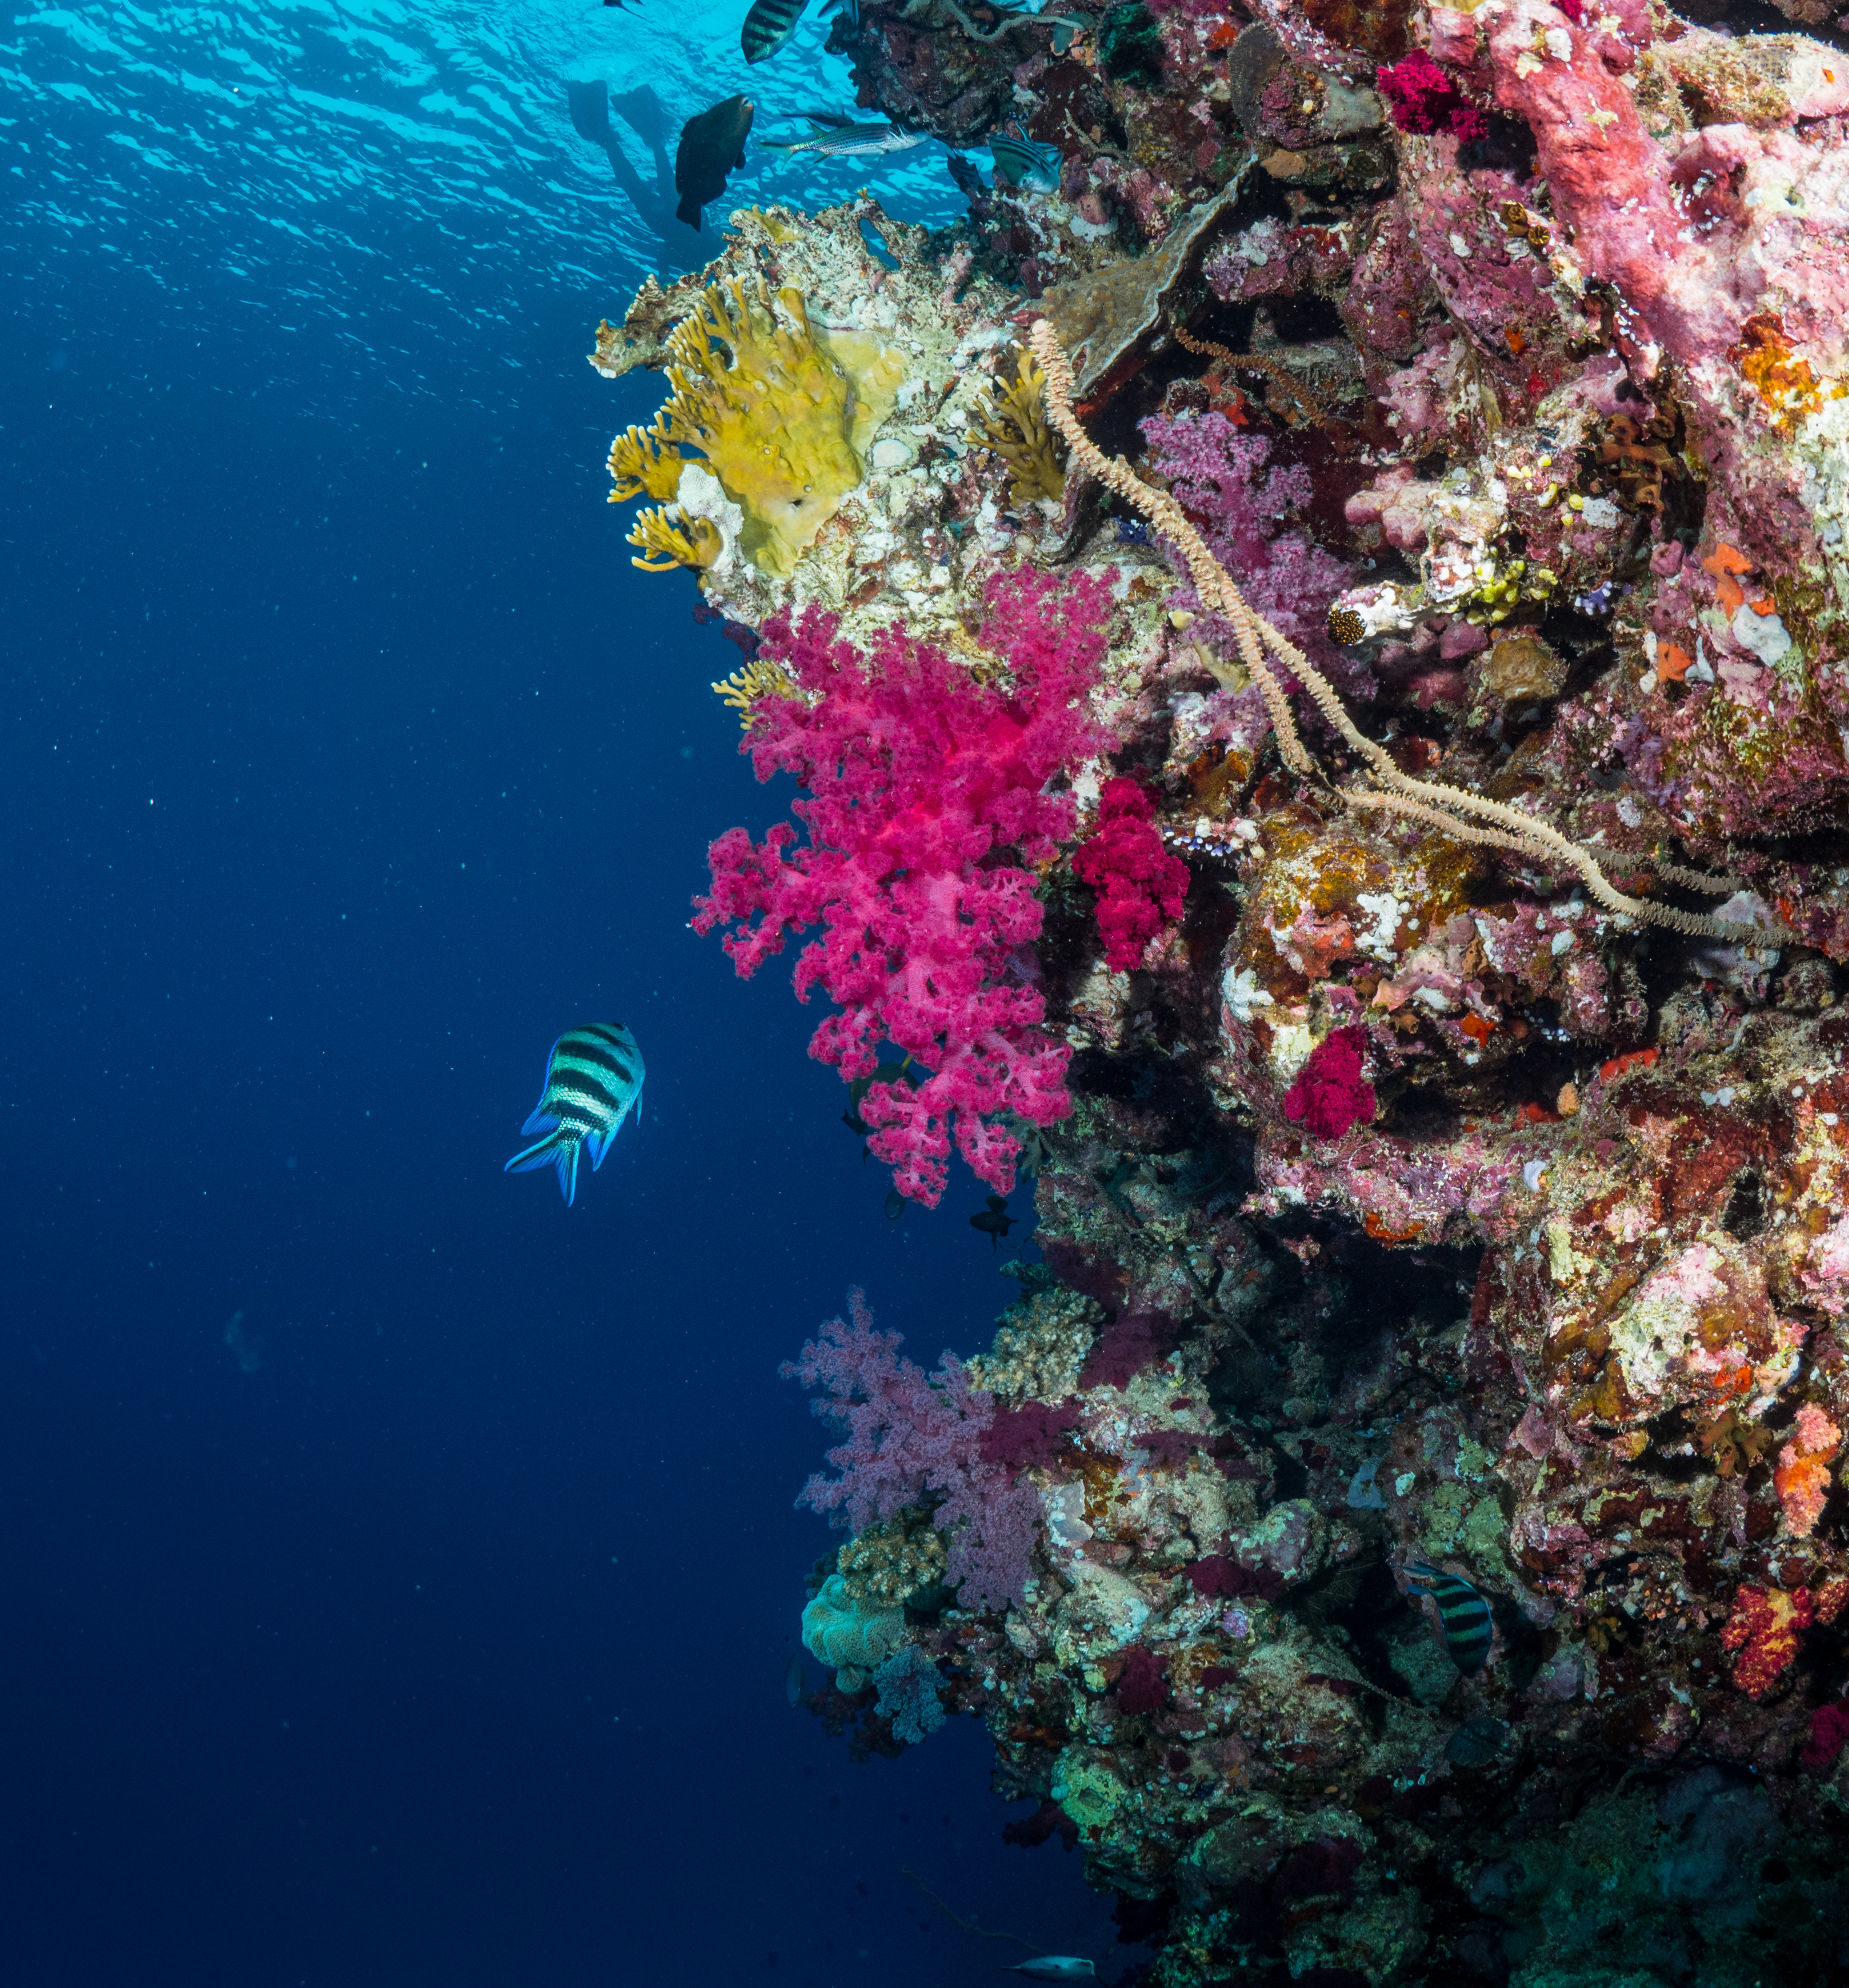 A vibrant underwater scene in the Red Sea: Colorful and healthy coral formations teeming with Sergeant Major fish.